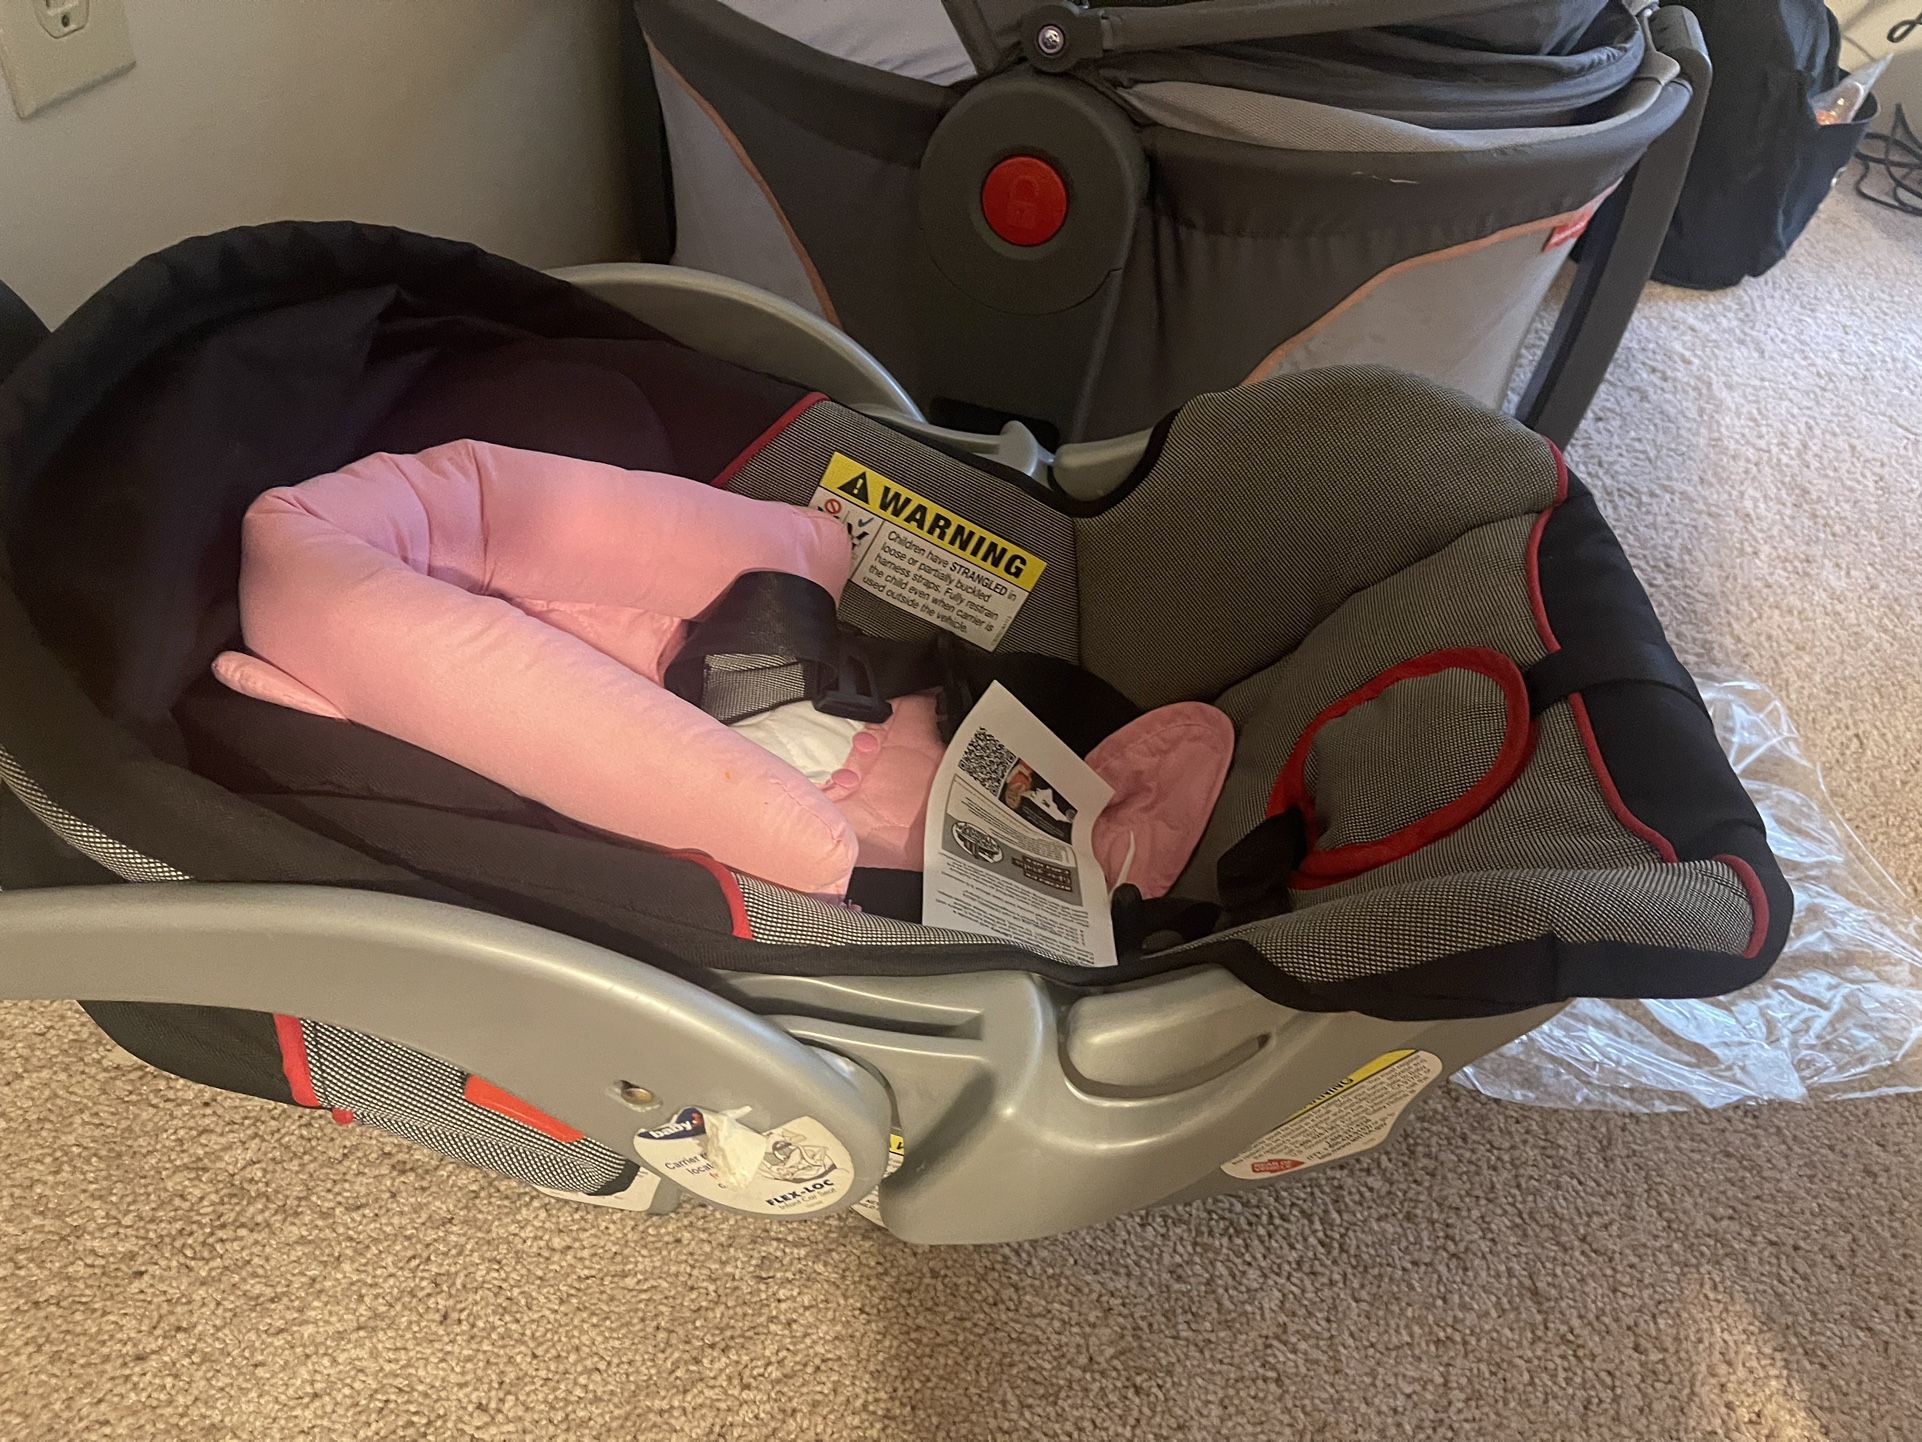 Baby Trend Car Seat 